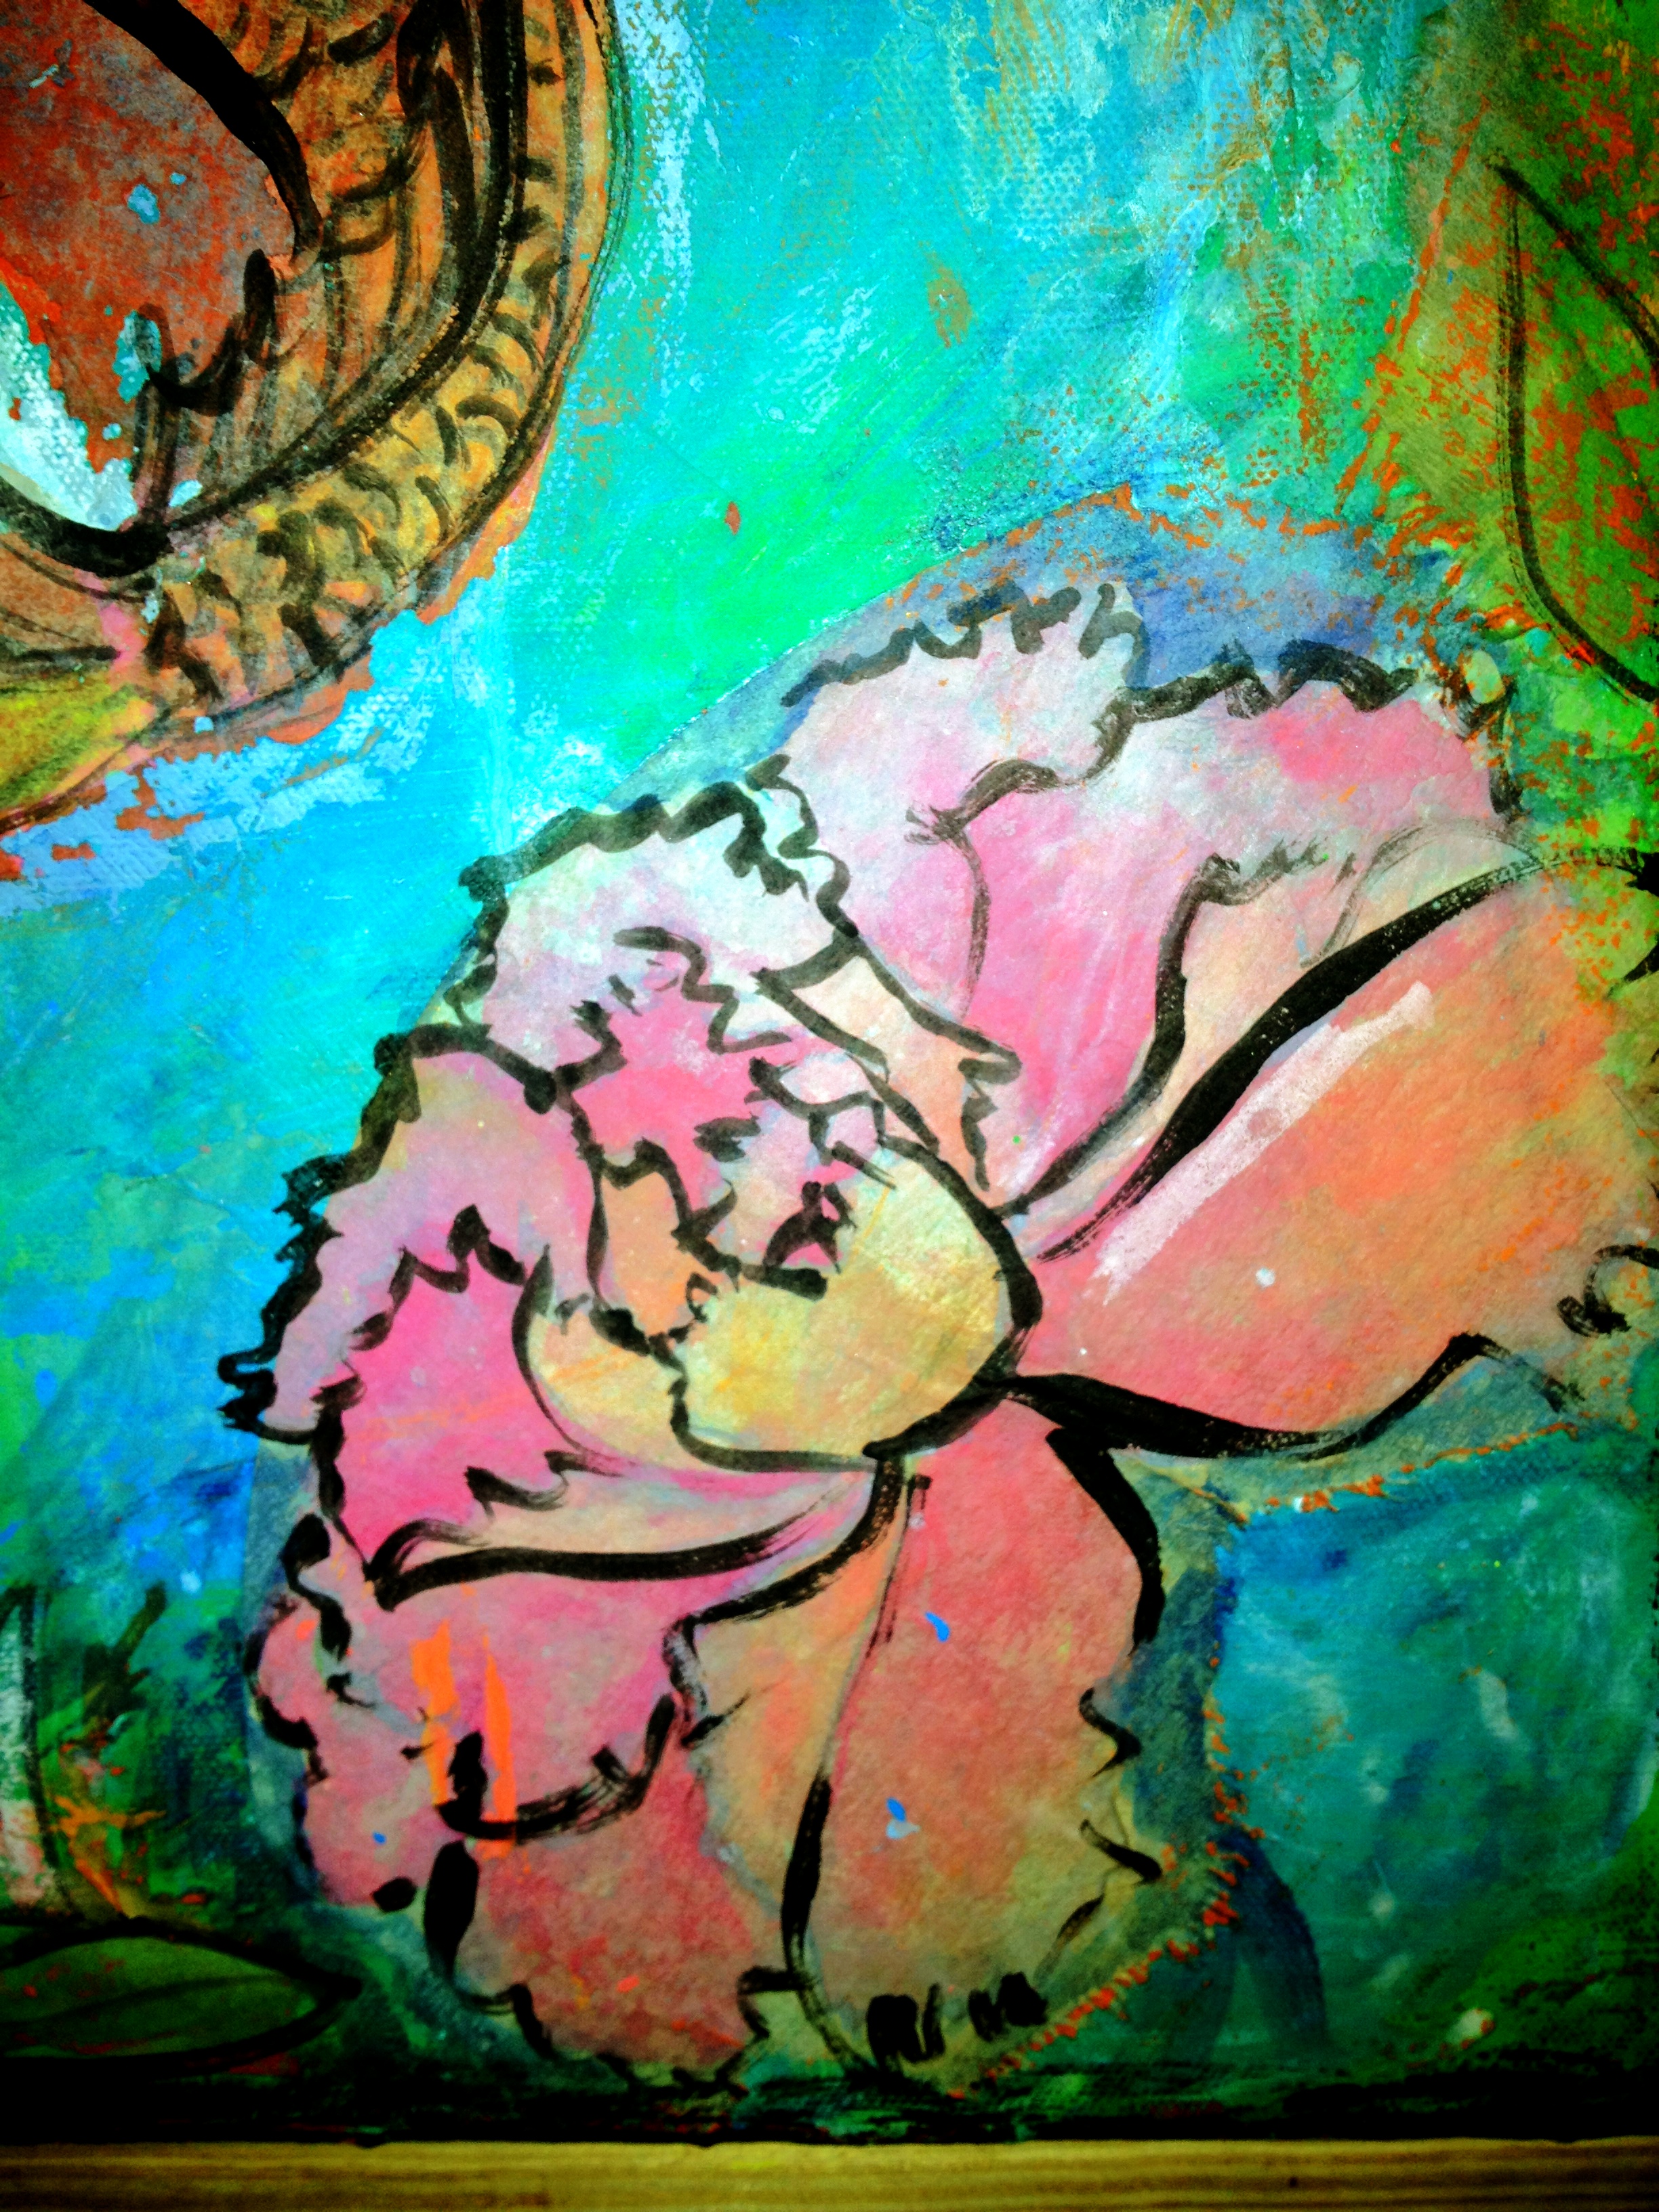 Watercolor And Oil Pastel Mixed Media Floral Painting